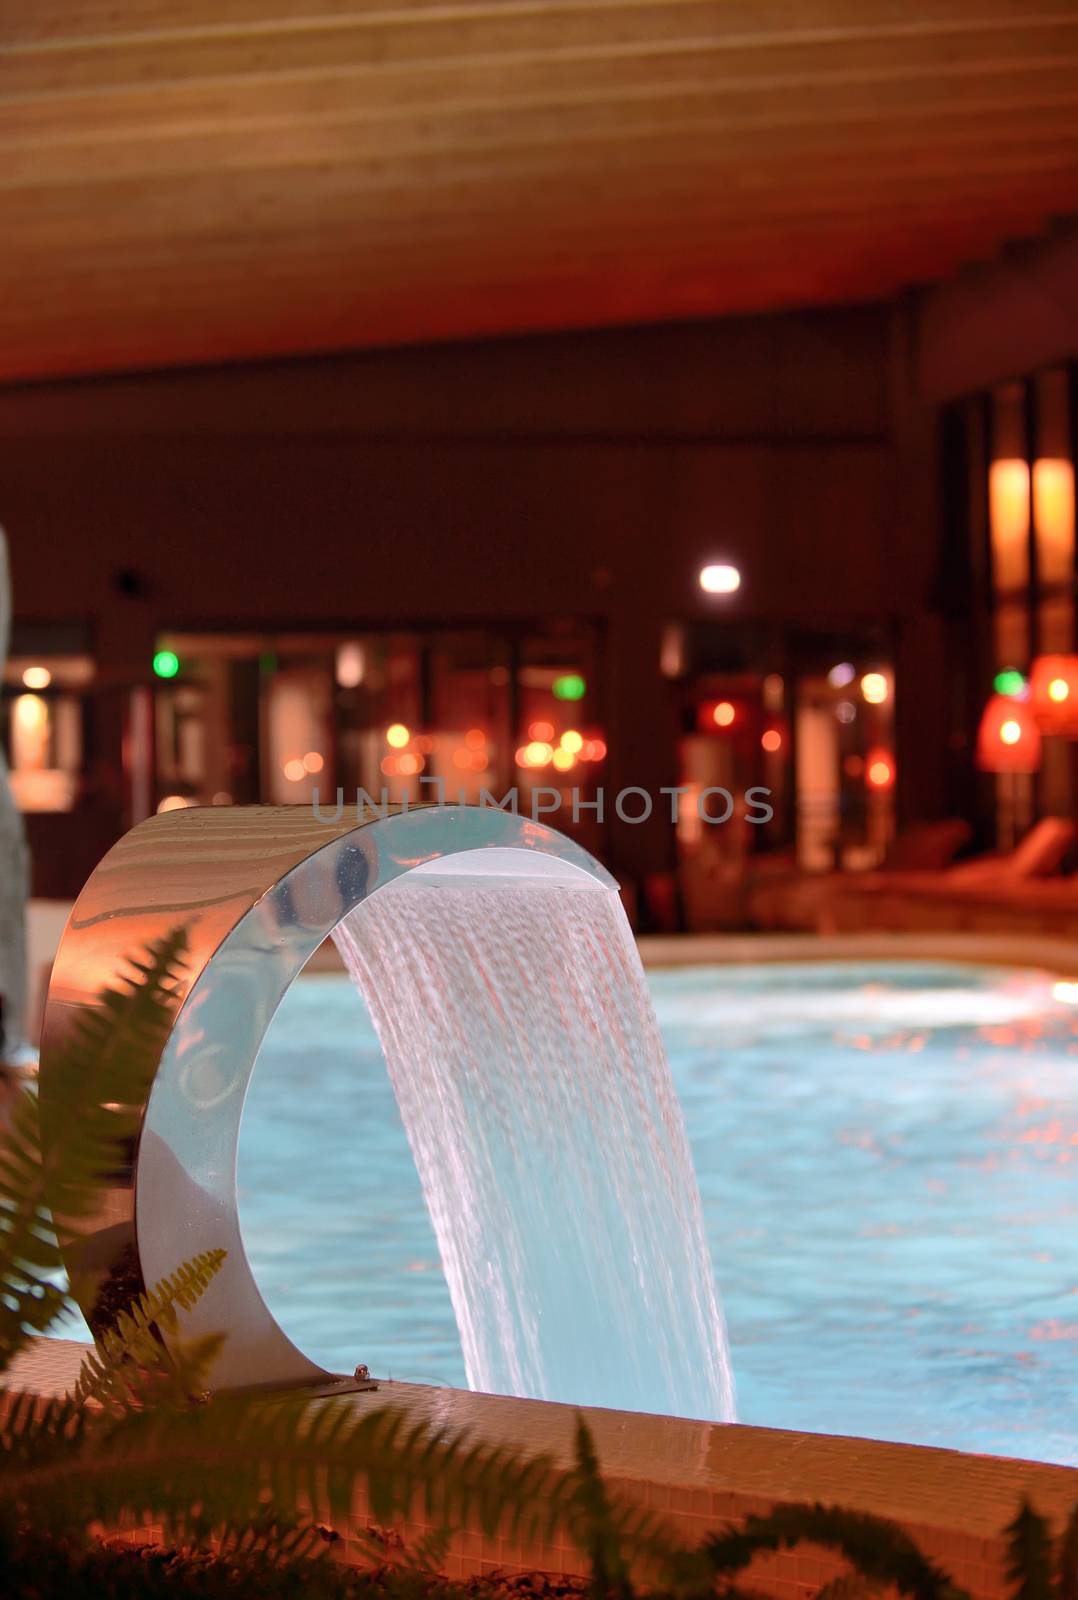 Relaxation pool in spa  by jordachelr